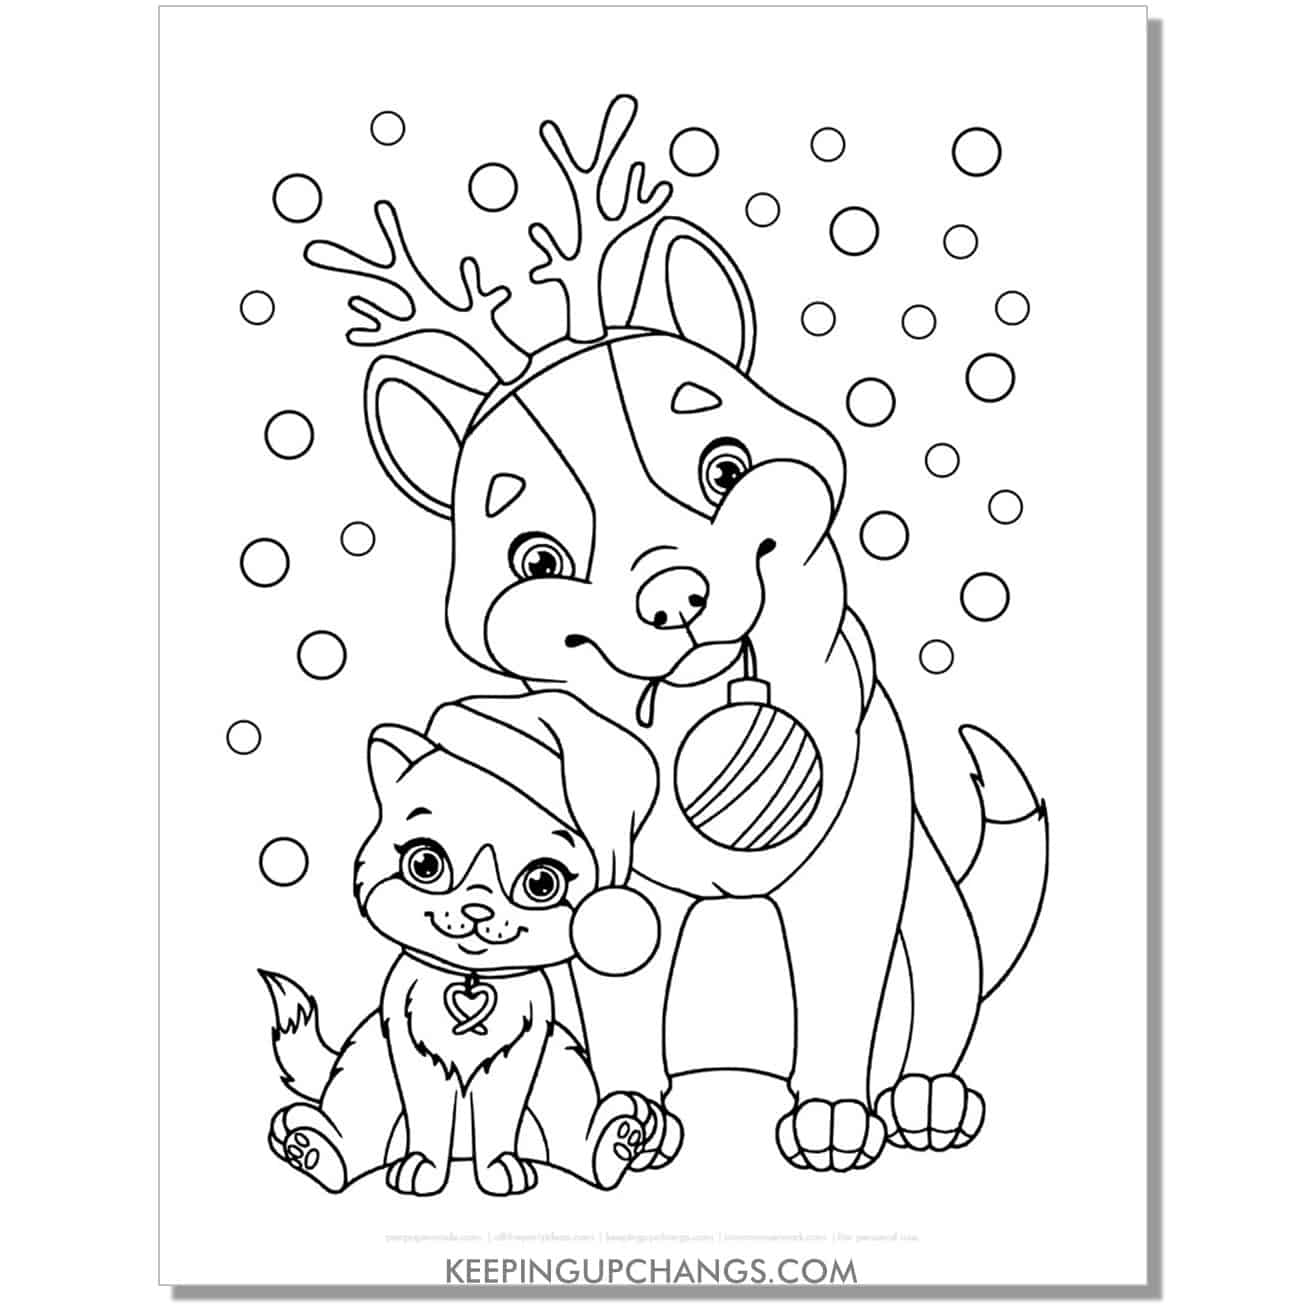 free dog in reindeer antlers and cat in santa hat cartoon christmas dog coloring page.